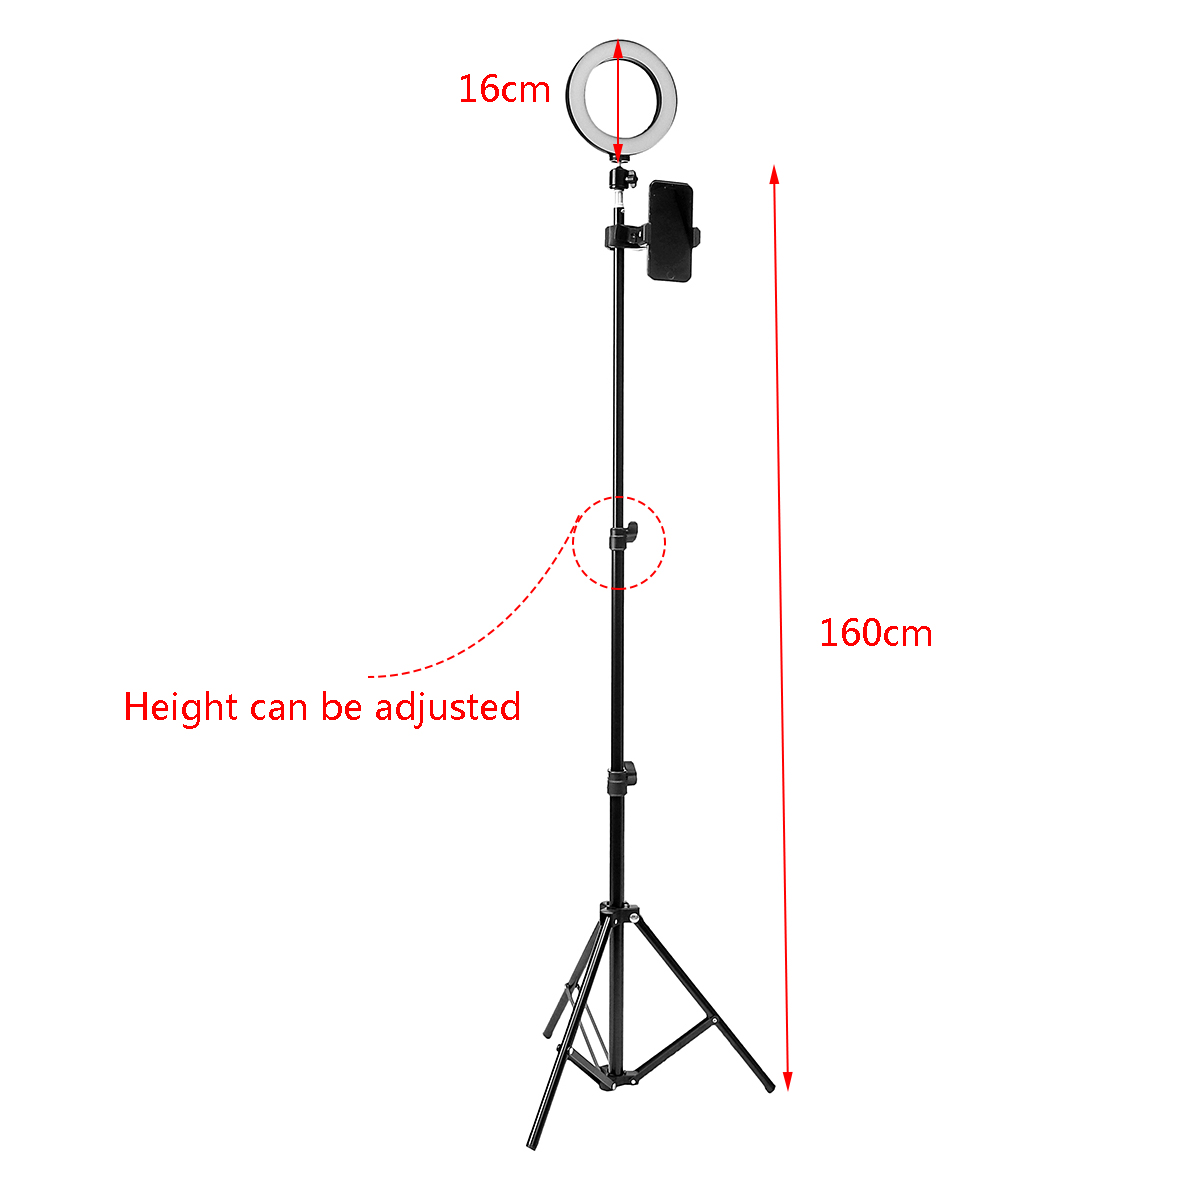 16cm-LED-Video-Ring-Light-5500K-Dimmable-with-160cm-Adjustable-Light-Stand-for-Youtube-Tiktok-Live-S-1403937-6